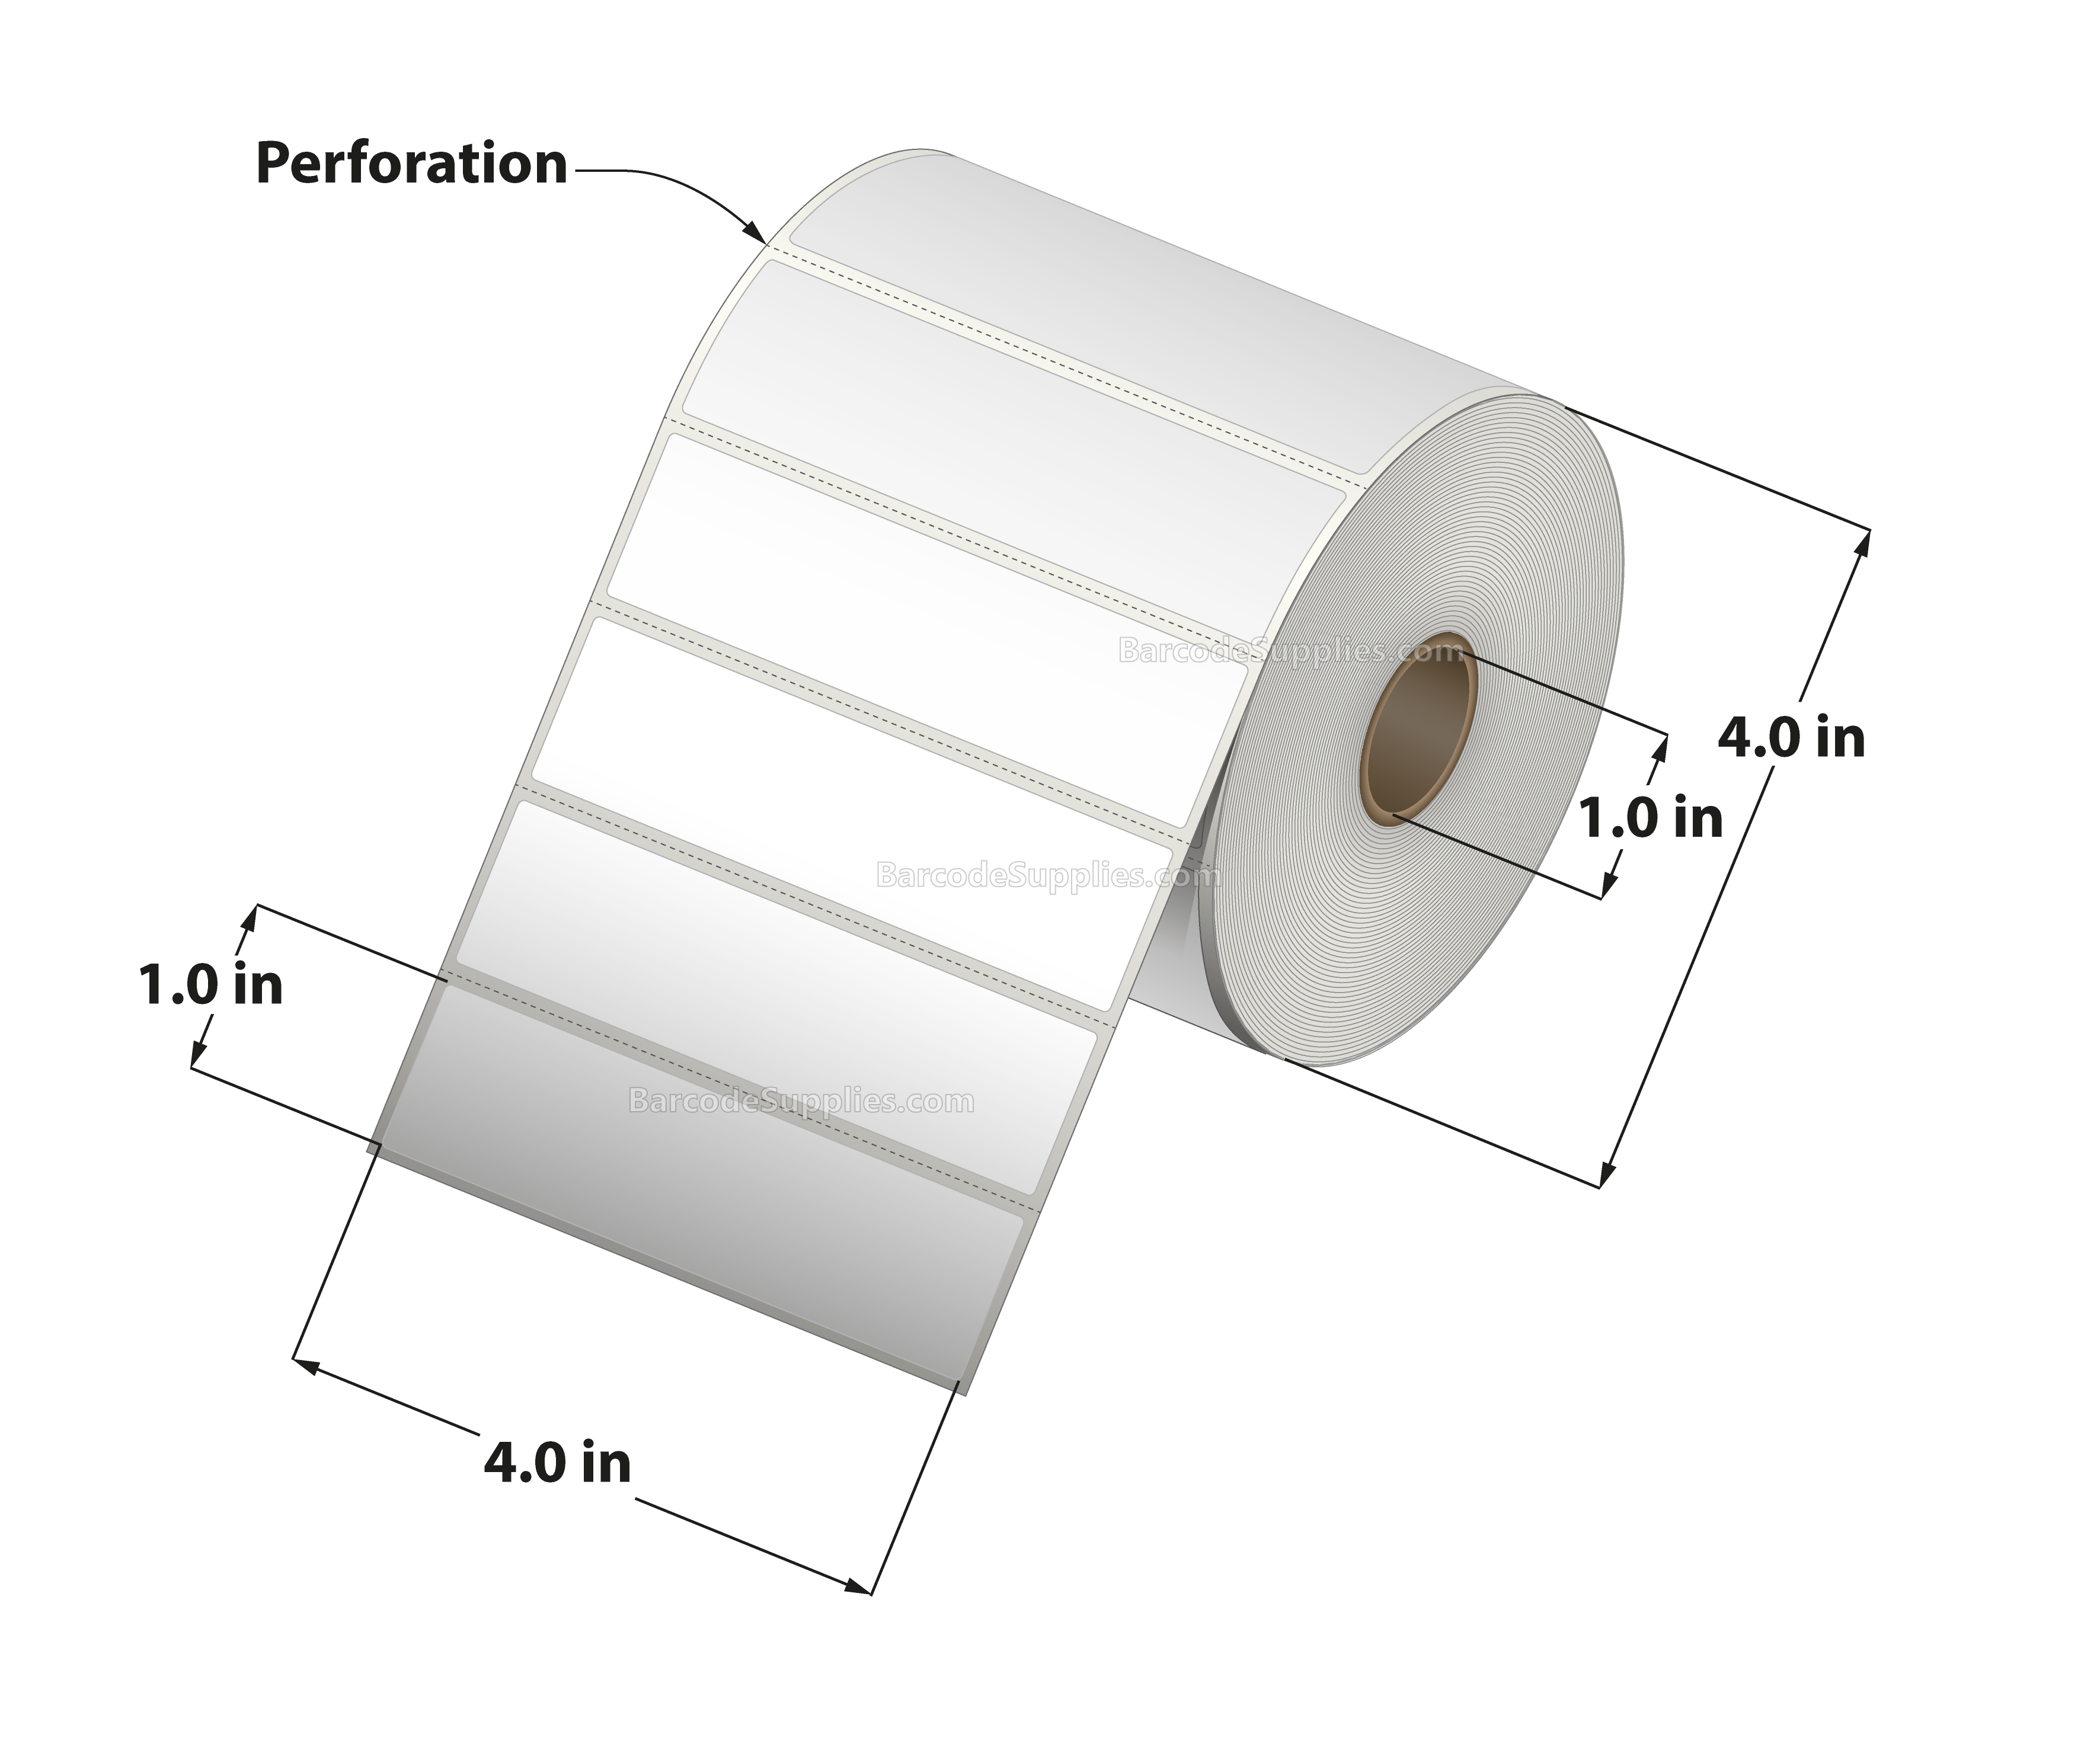 4 x 1 Direct Thermal White Labels With Acrylic Adhesive - Perforated - 1375 Labels Per Roll - Carton Of 12 Rolls - 16500 Labels Total - MPN: RD-4-1-1375-1 - BarcodeSource, Inc.